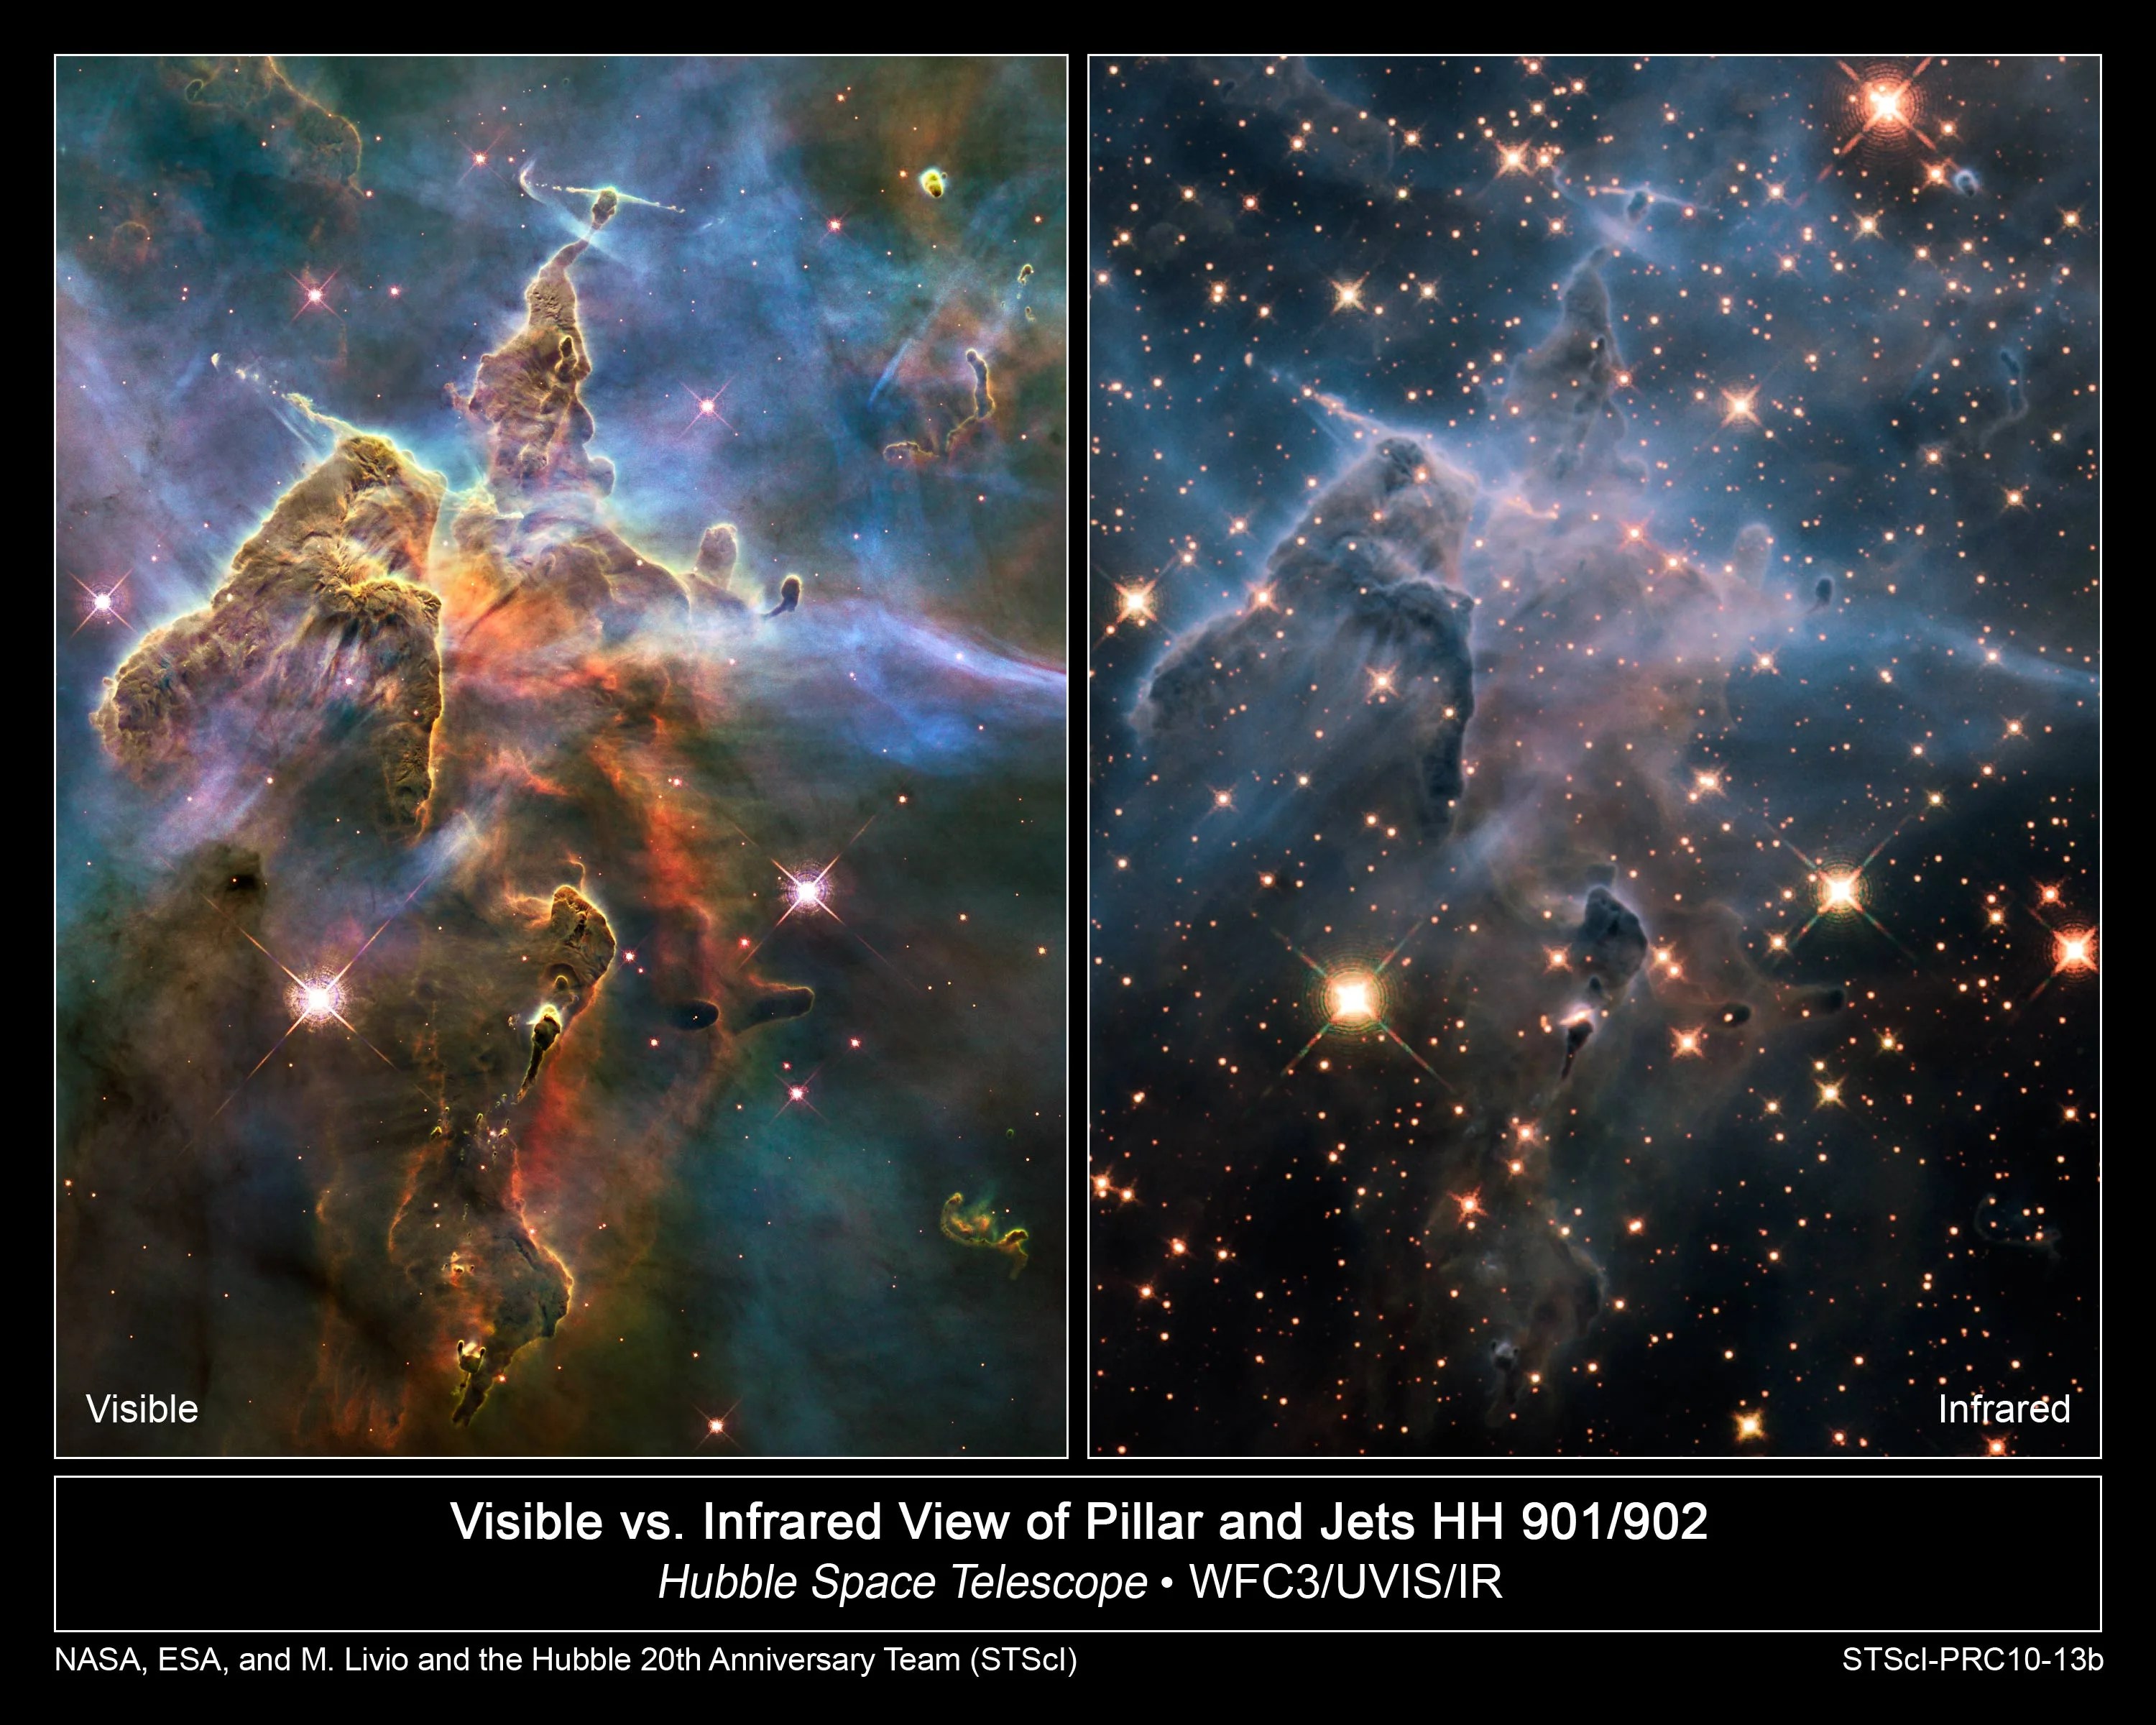 Visible (left) and infrared Hubble images of Carina Nebula